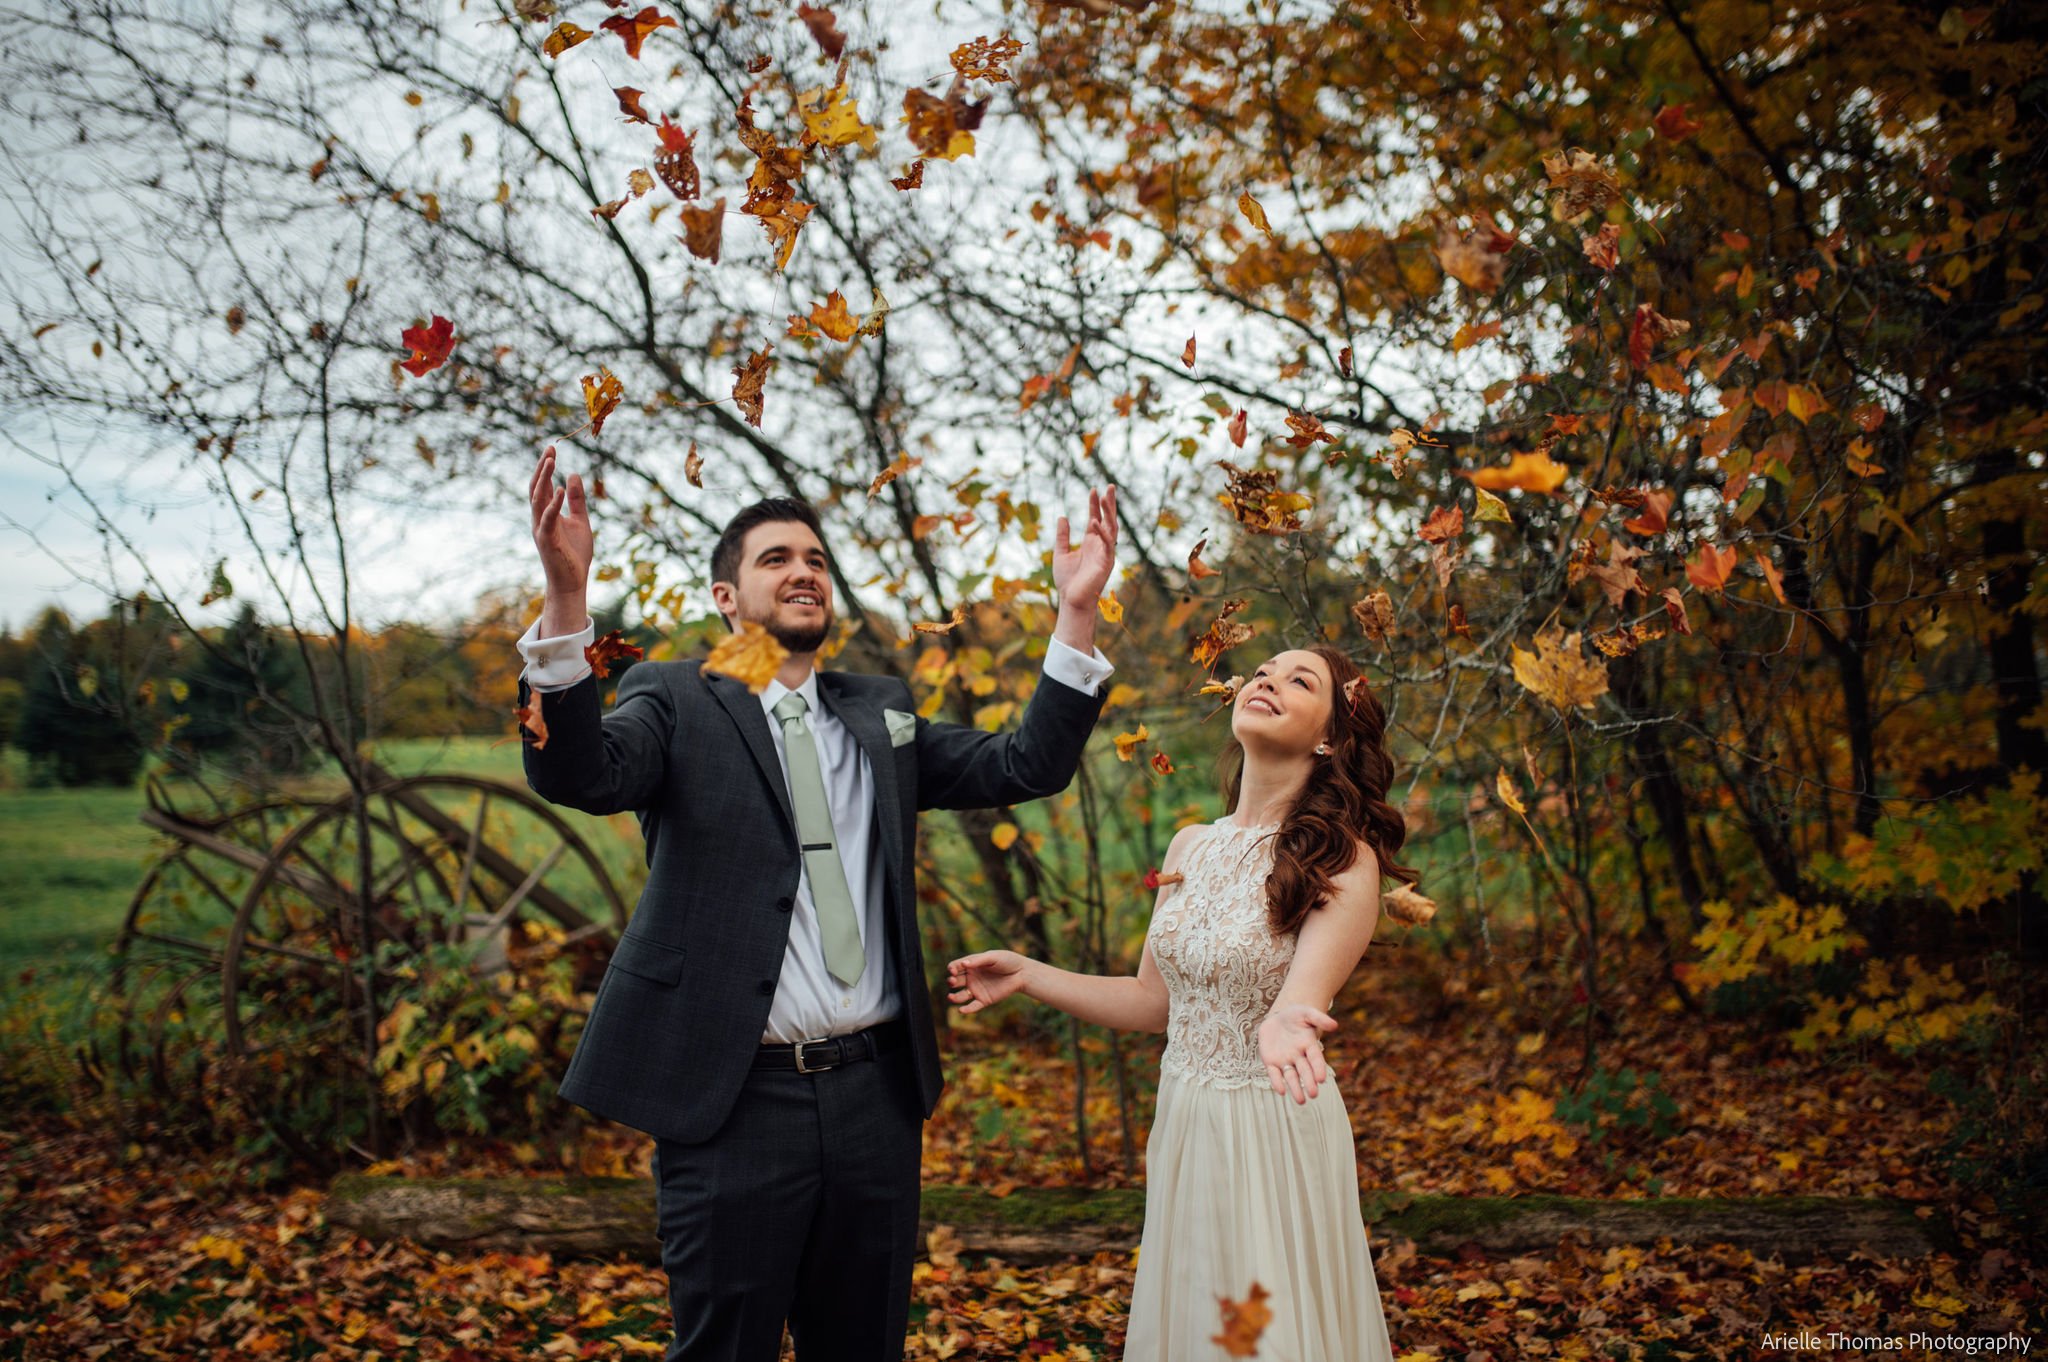 A bride and groom outside with fall leaves all around them